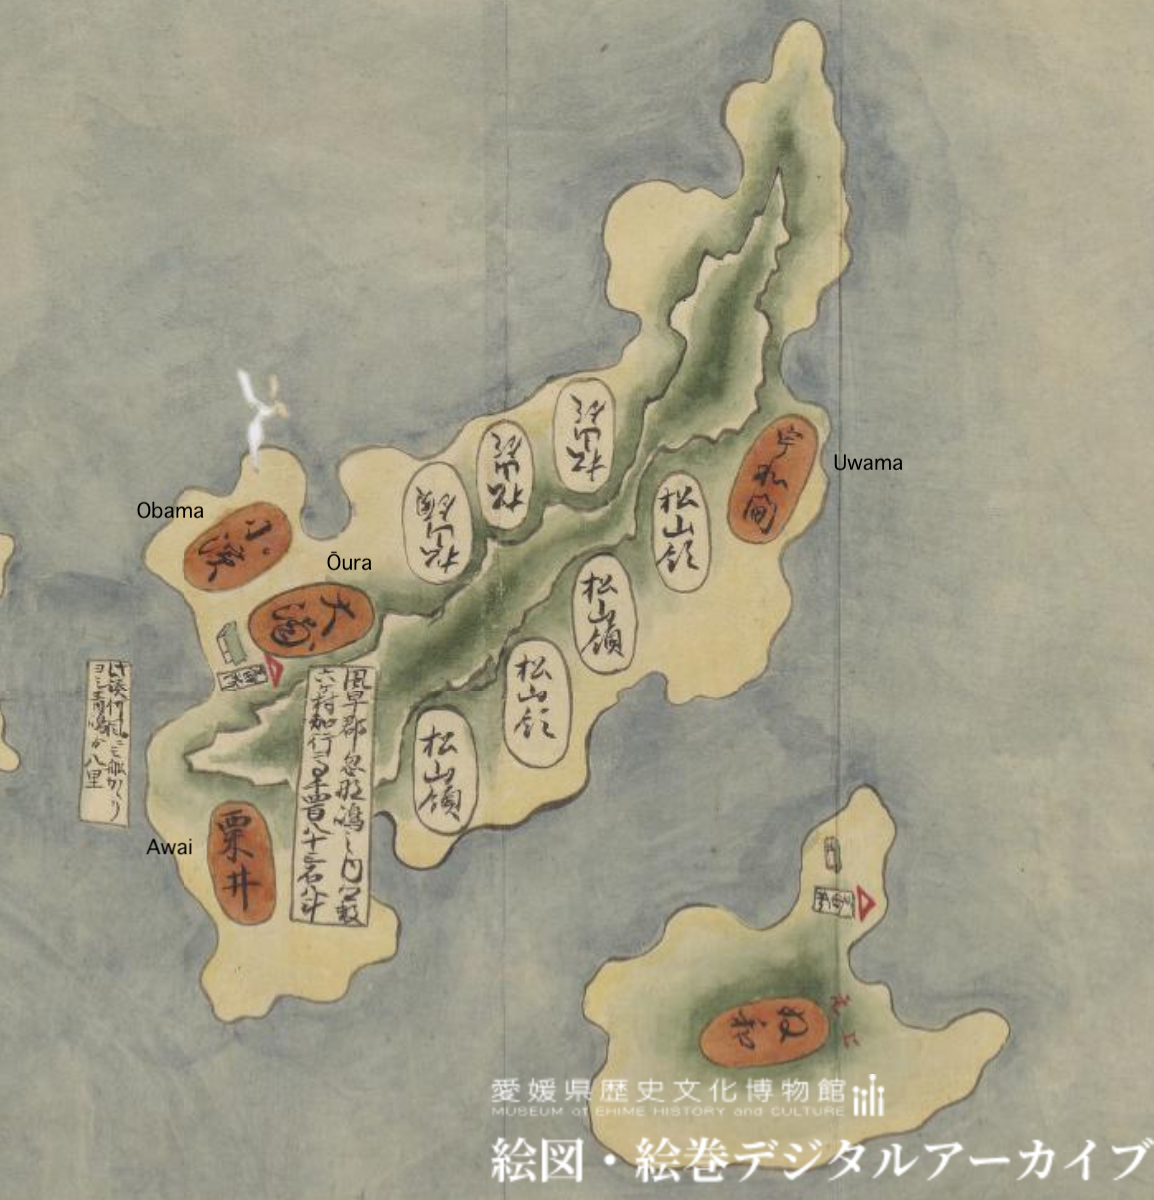 Algorithmic Maps and the Political Geography of Early-modern Japan